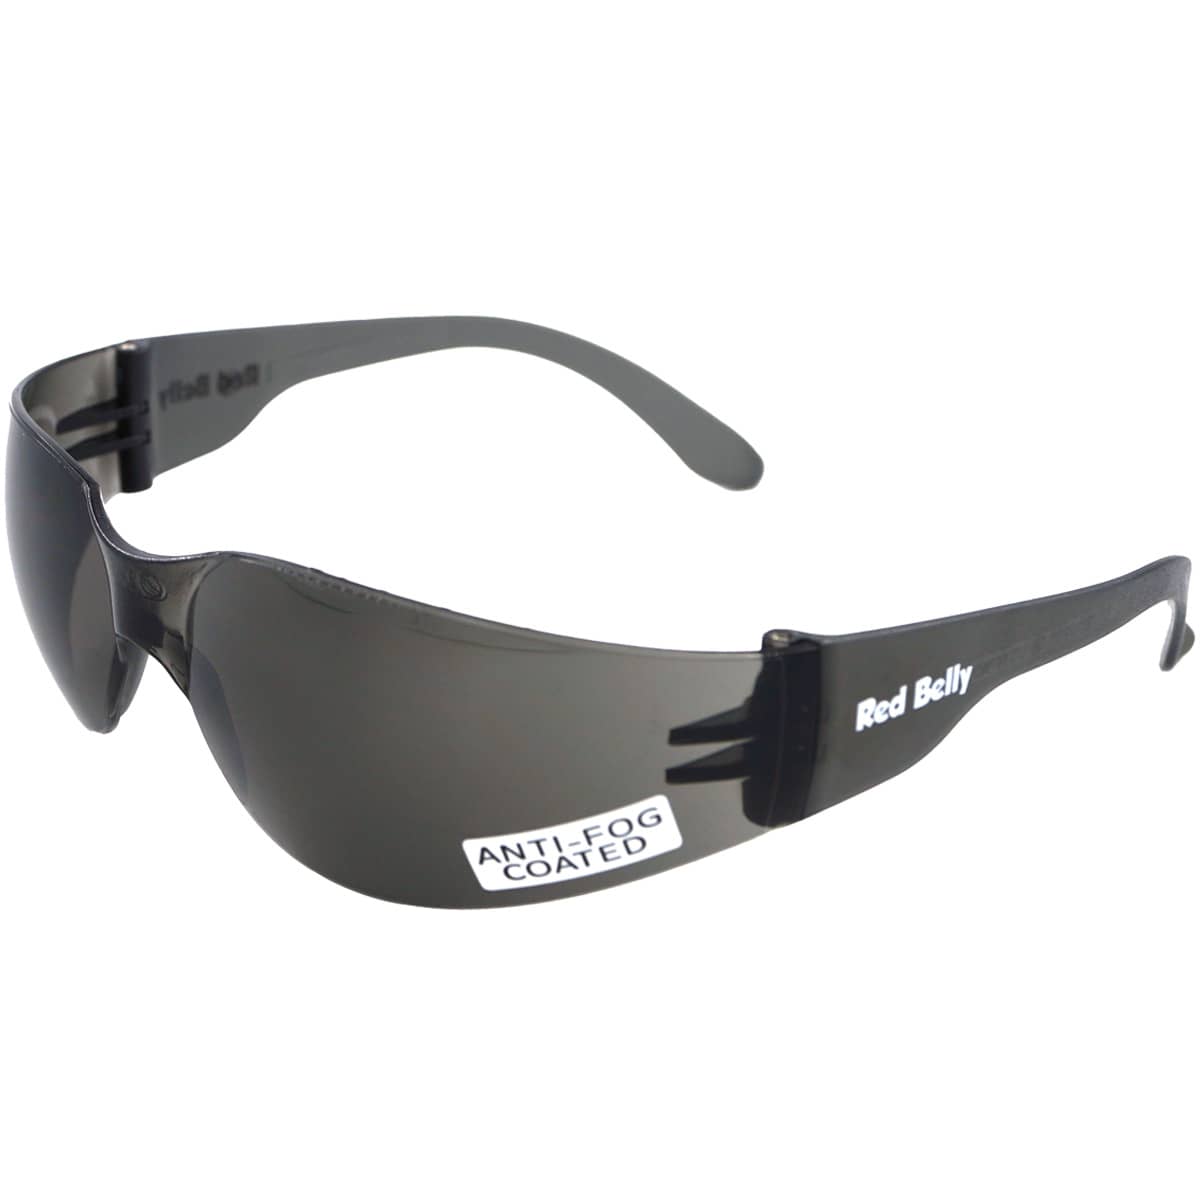 Vortex Safety Spectacles - Smoked